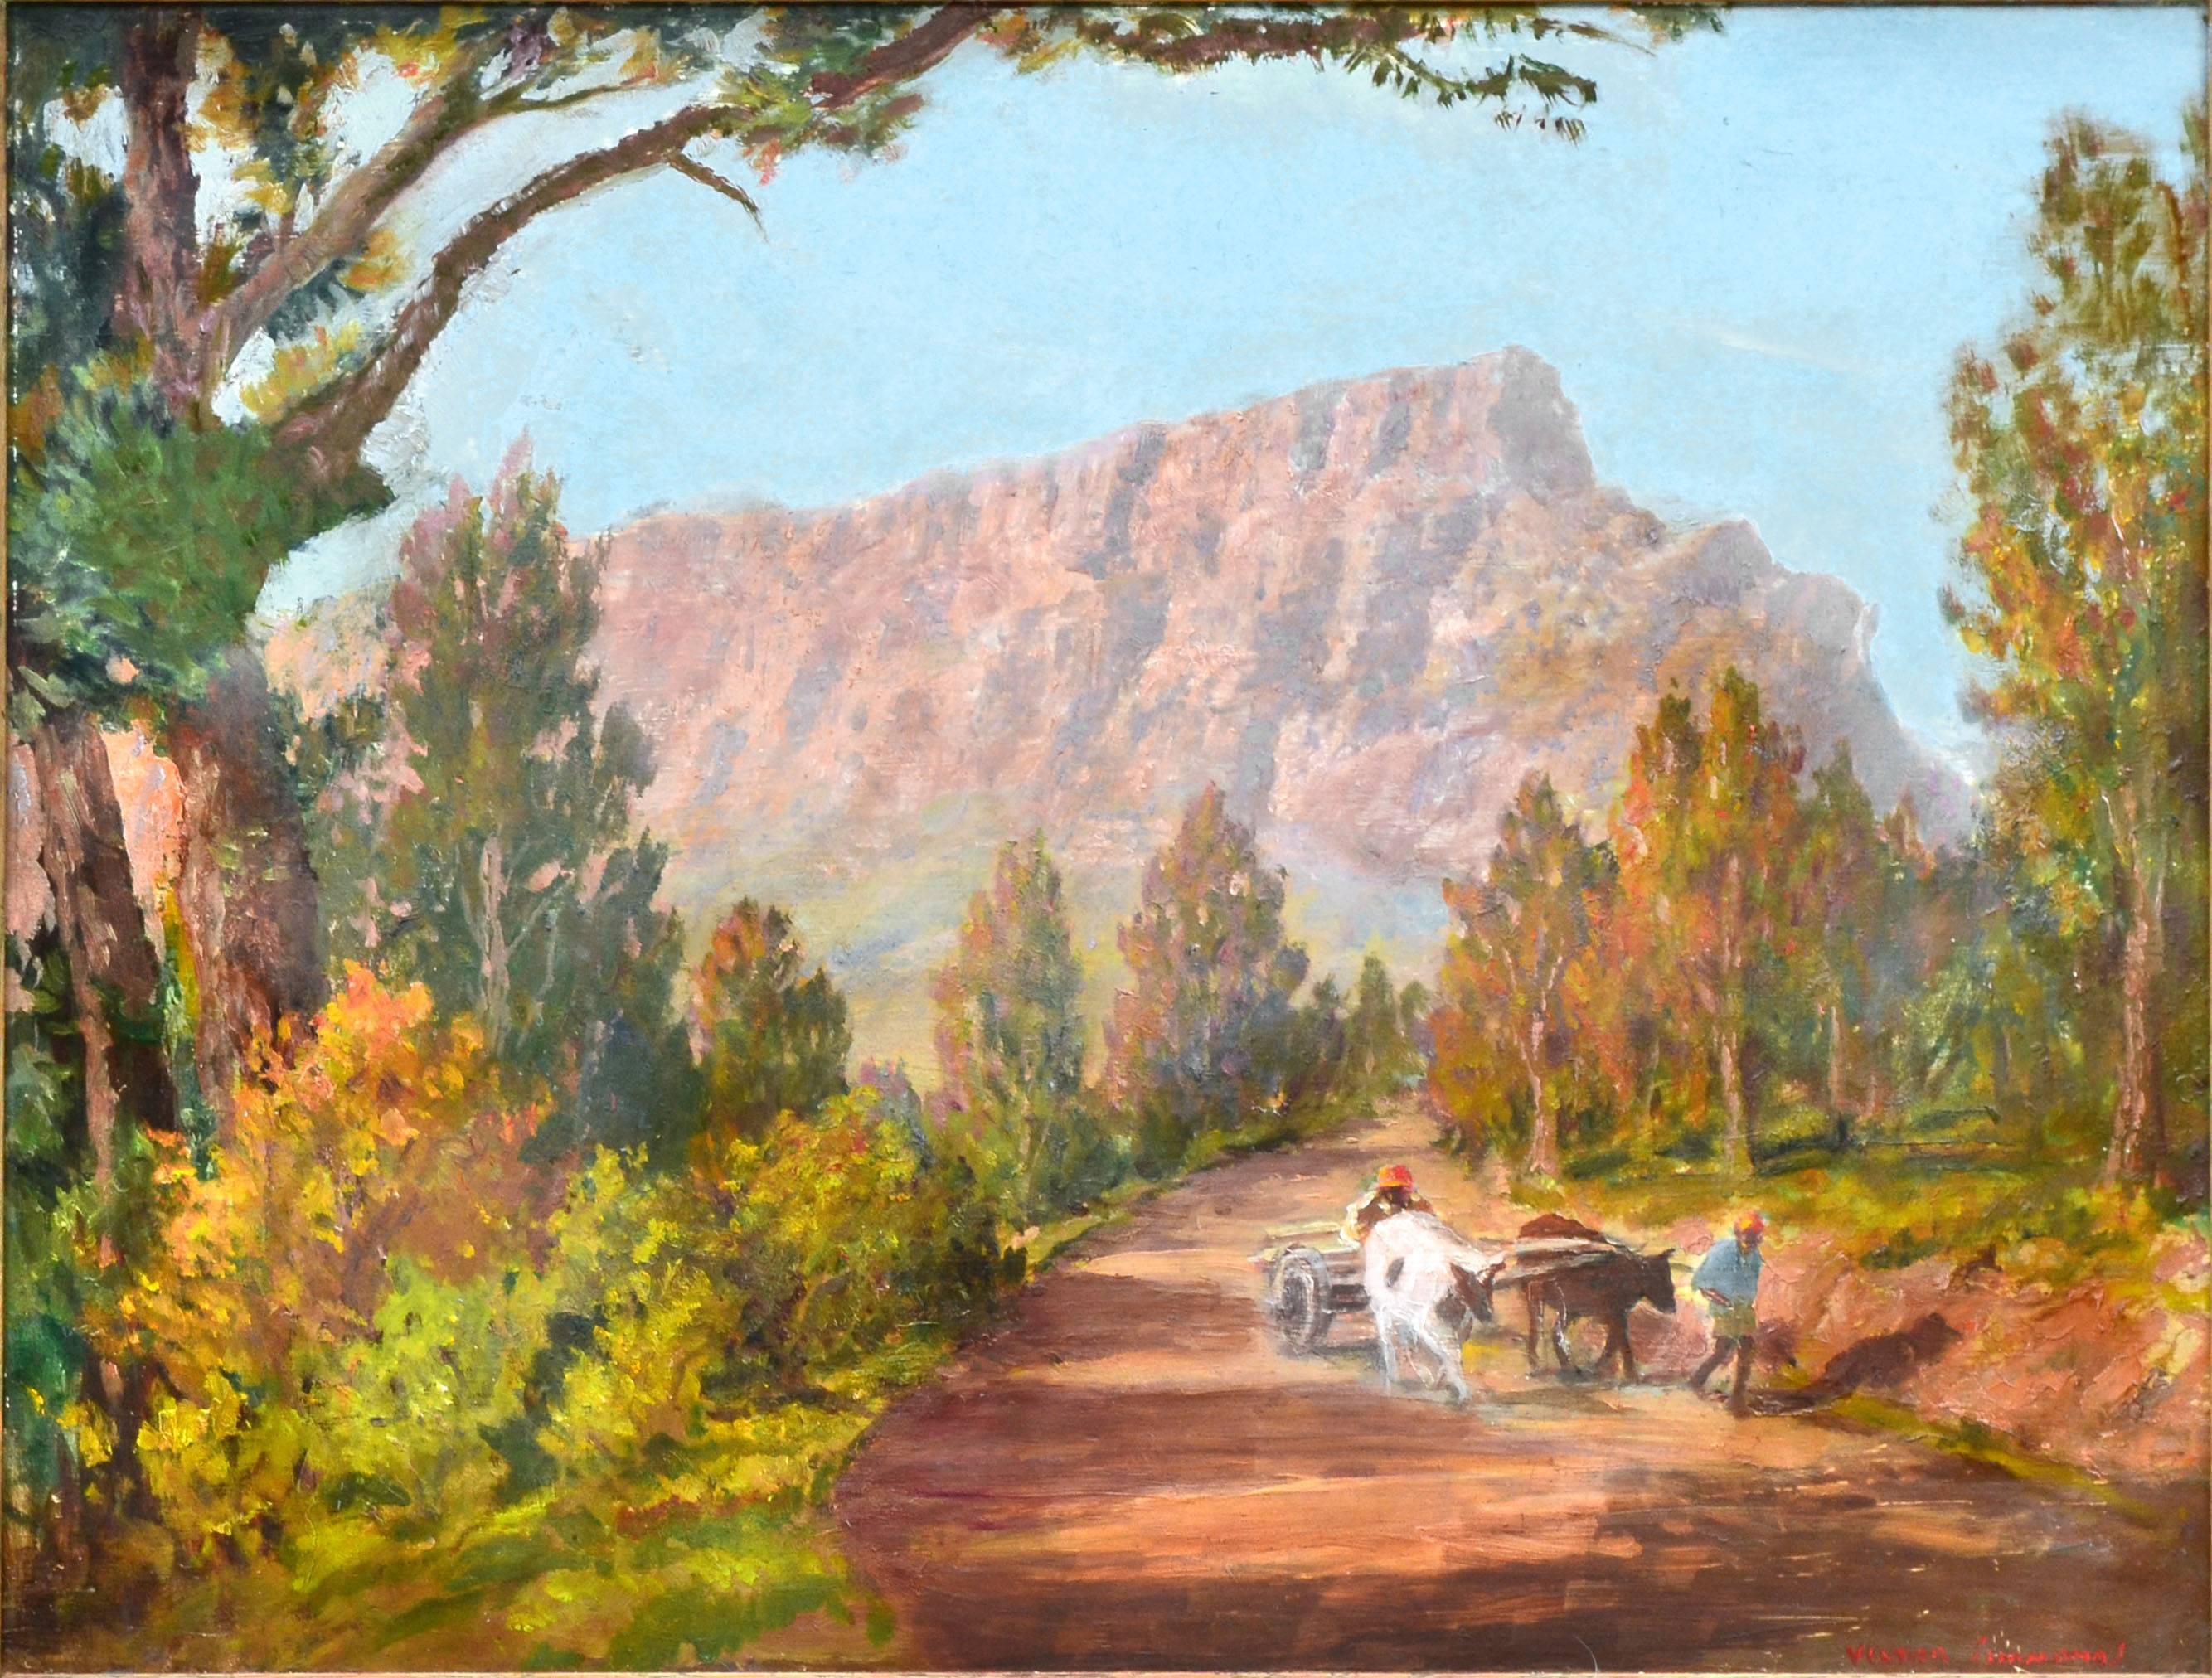 Victor F. Simmonds Landscape Painting - Mid Century South African Mountain Landscape